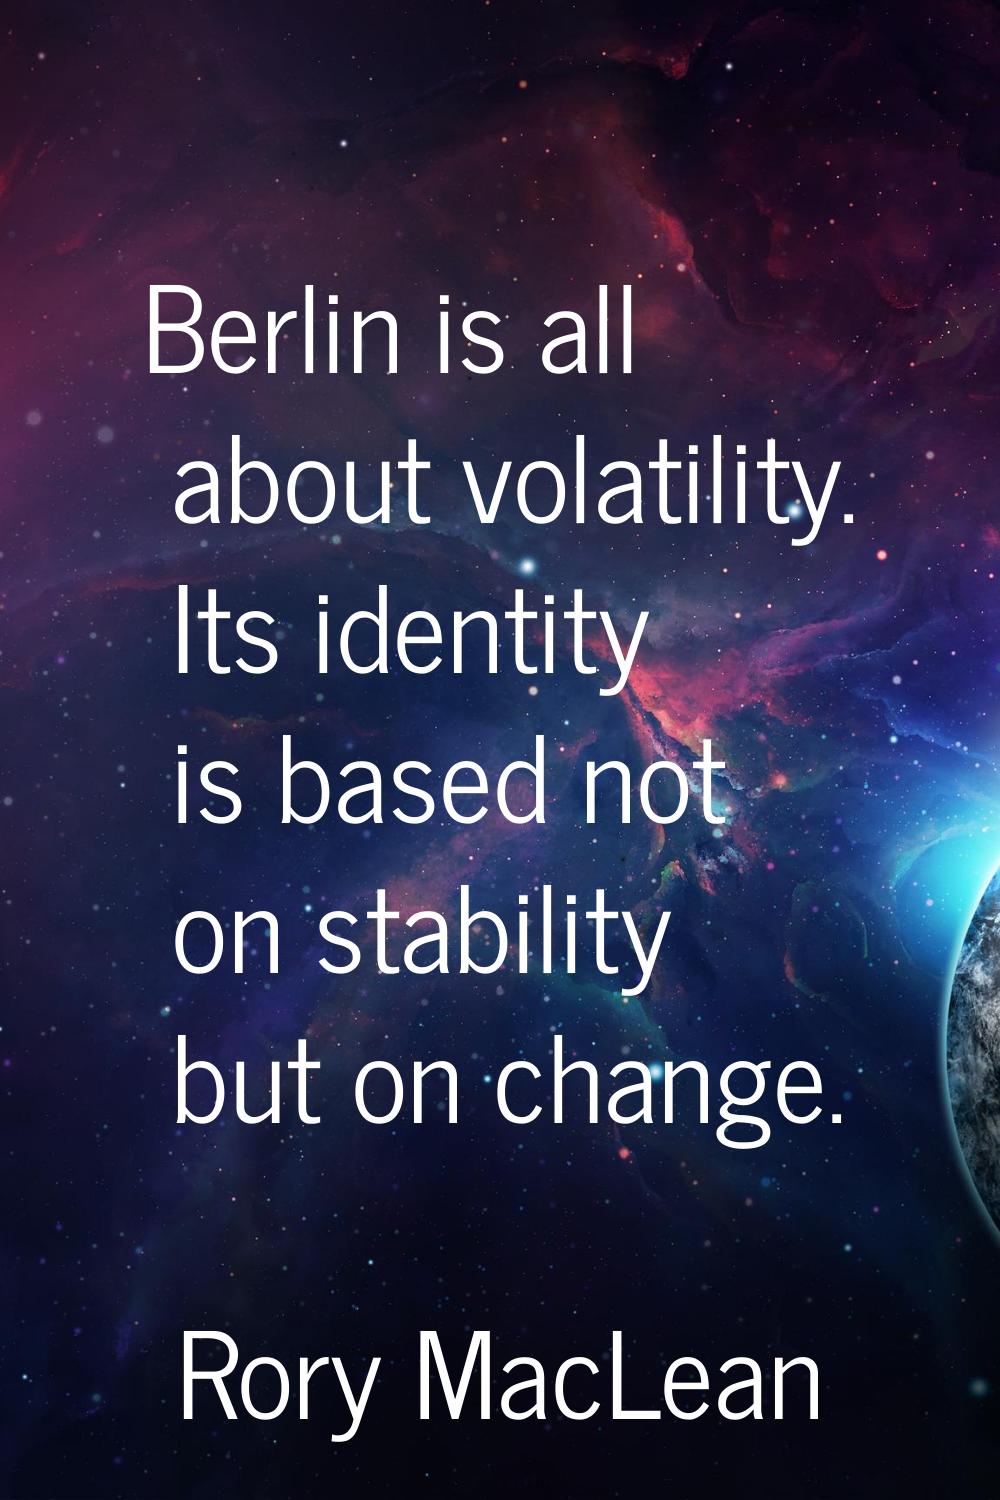 Berlin is all about volatility. Its identity is based not on stability but on change.